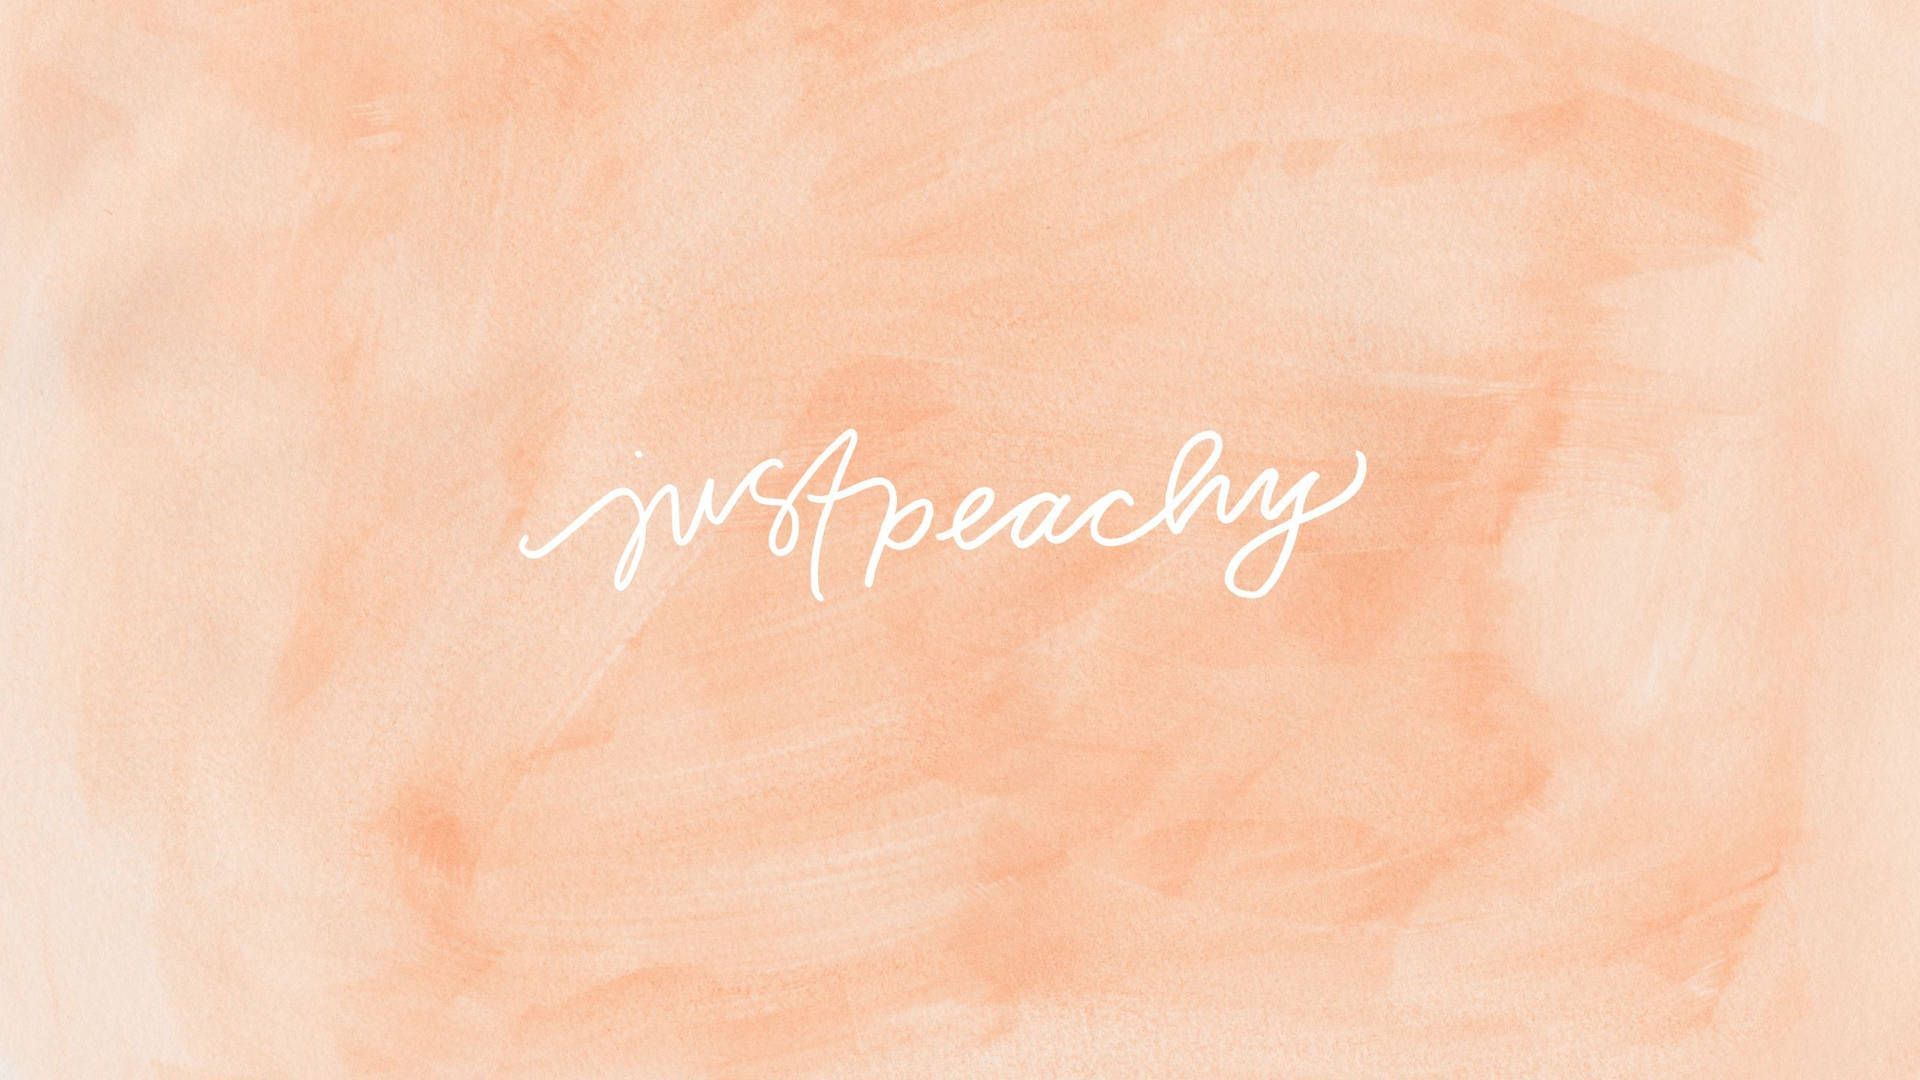 A painting of an orange background with white writing - Peach